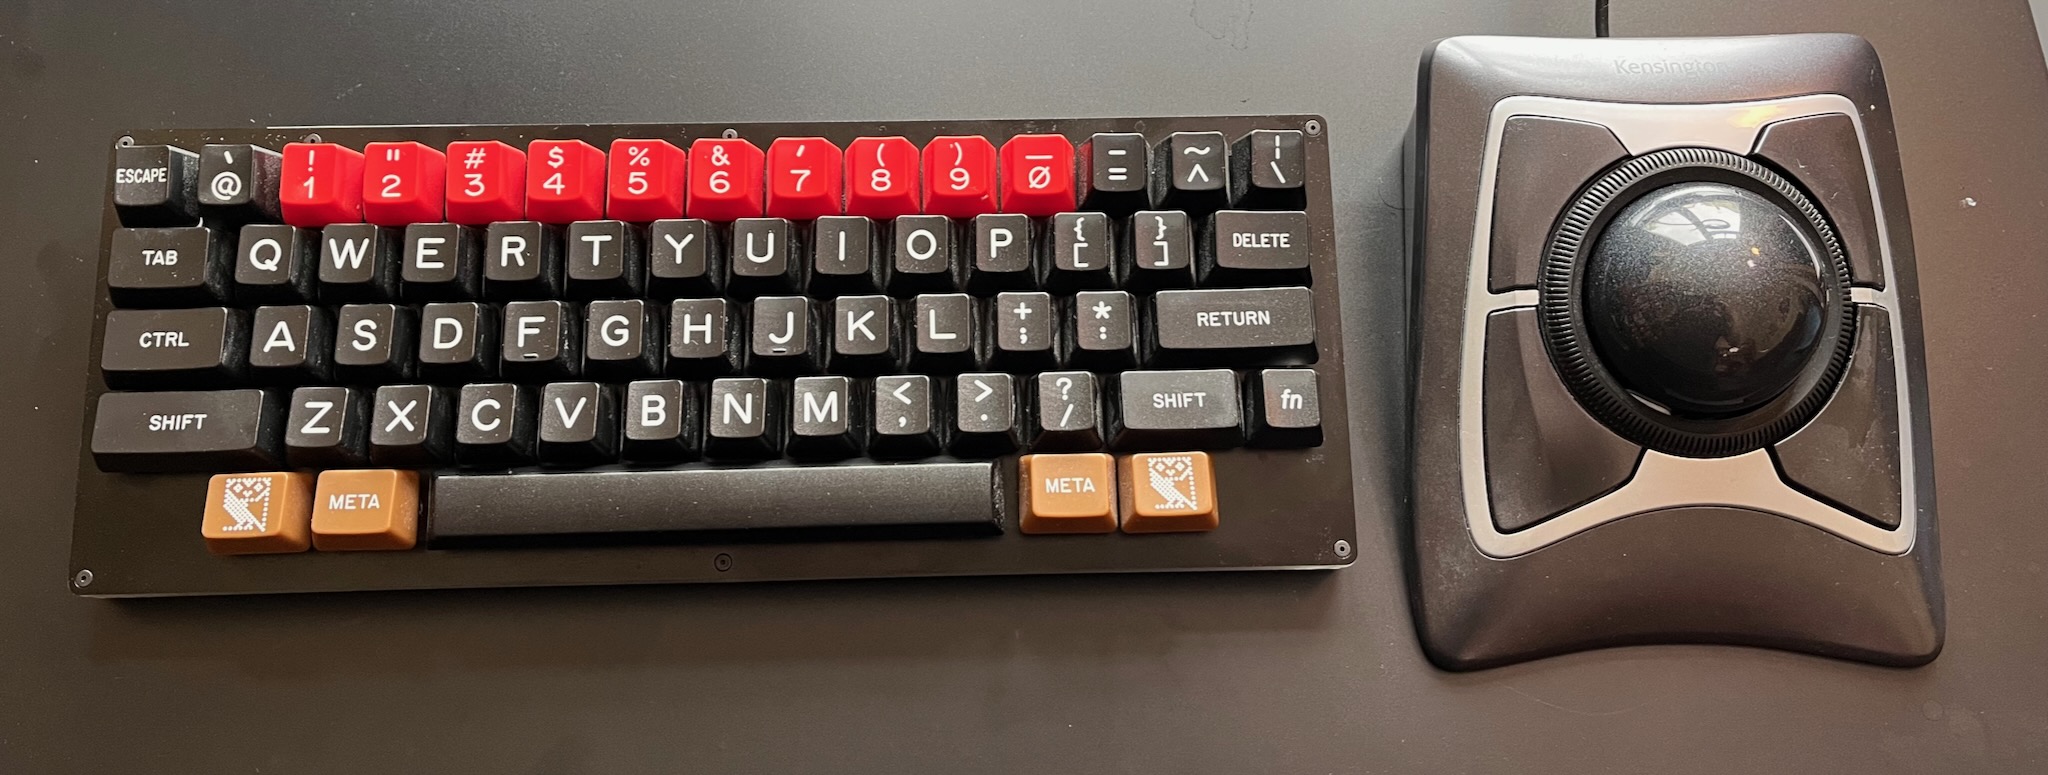 a dusty compact keyboard with red number keys and brown modifier keys; the ALT keys feature the BBC computer literacy project owl logo; to the right of the keyboard is a Kensington Expert Mouse trackball